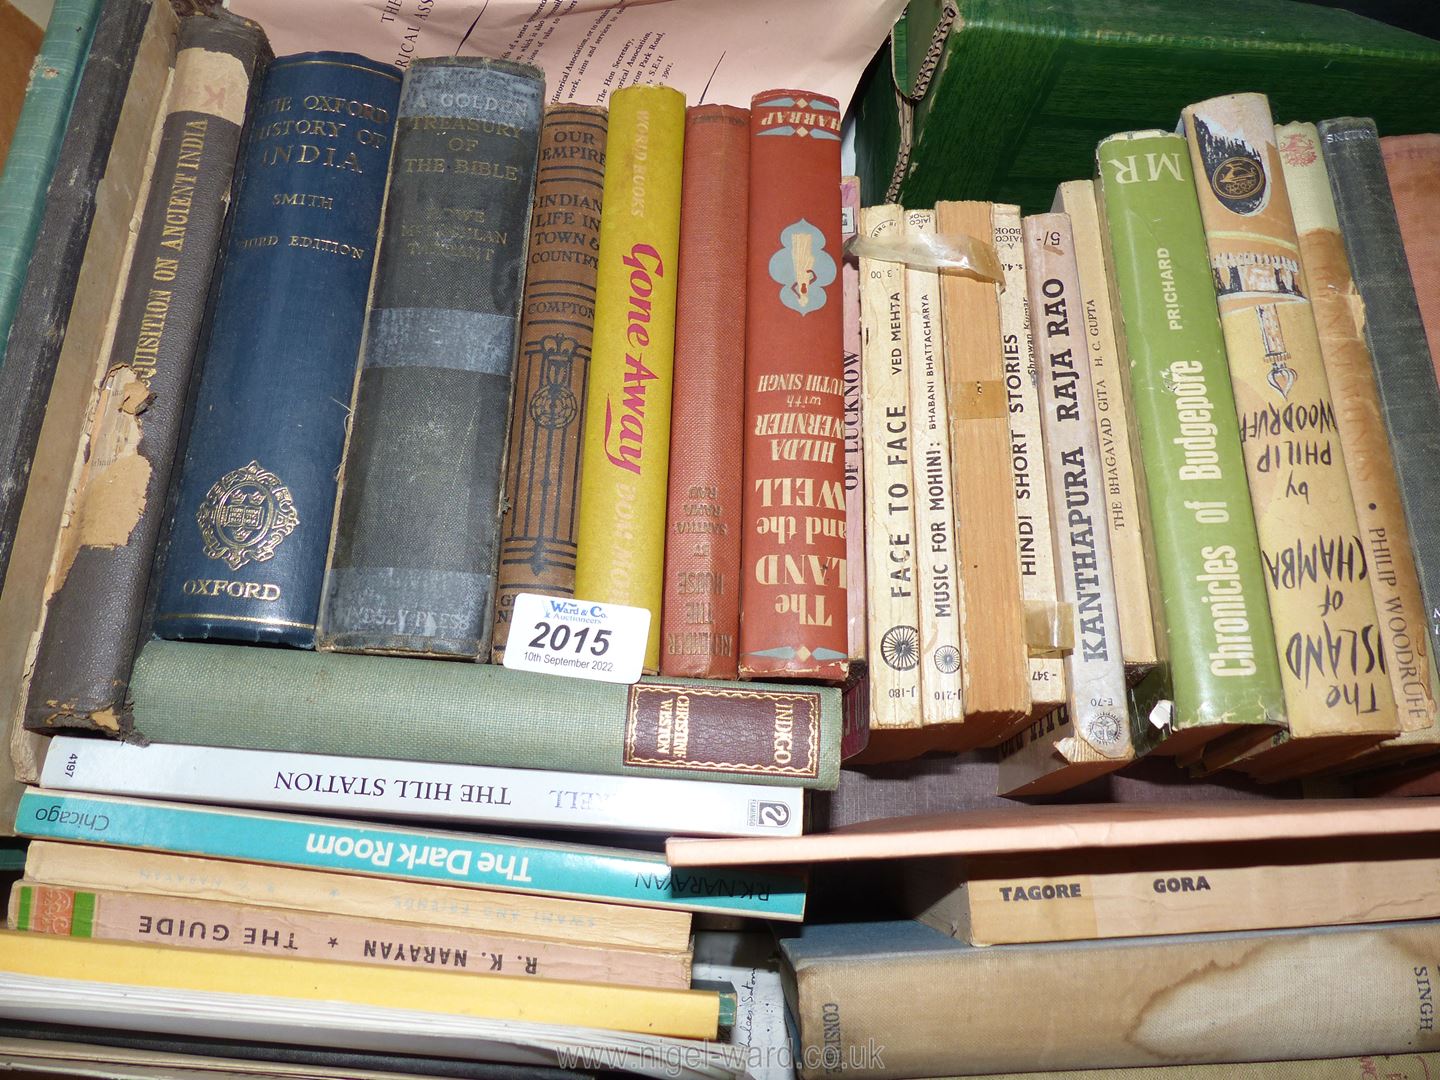 A box of books including 'The Journal of The Benares Hindu University 1940',